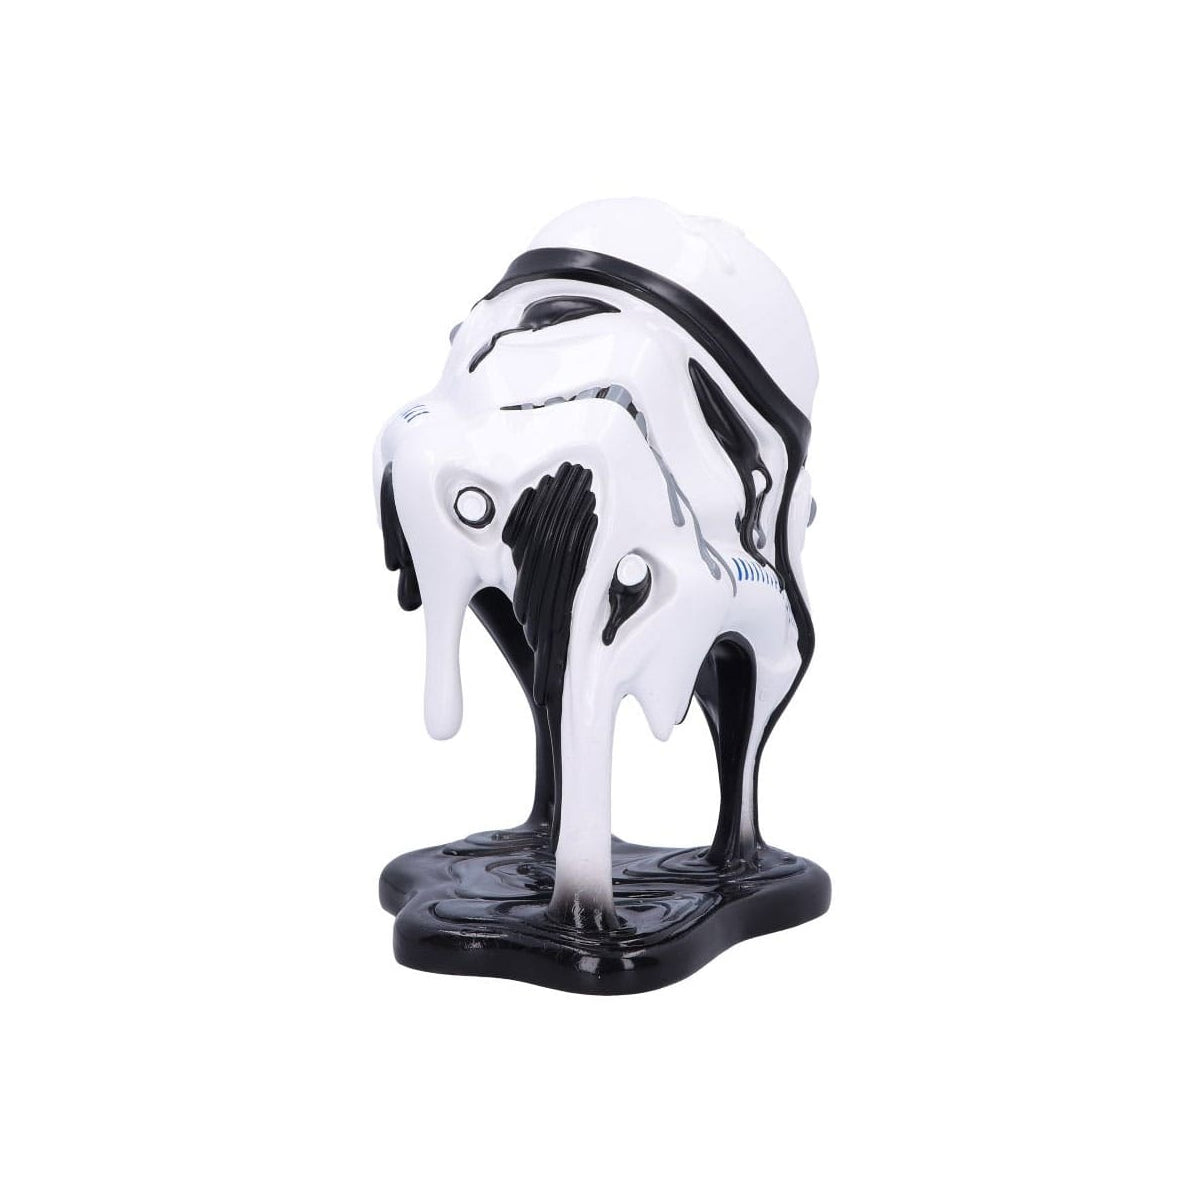 Star Wars - Statuette Stormtrooper "Too Hot To Handle" 23cm